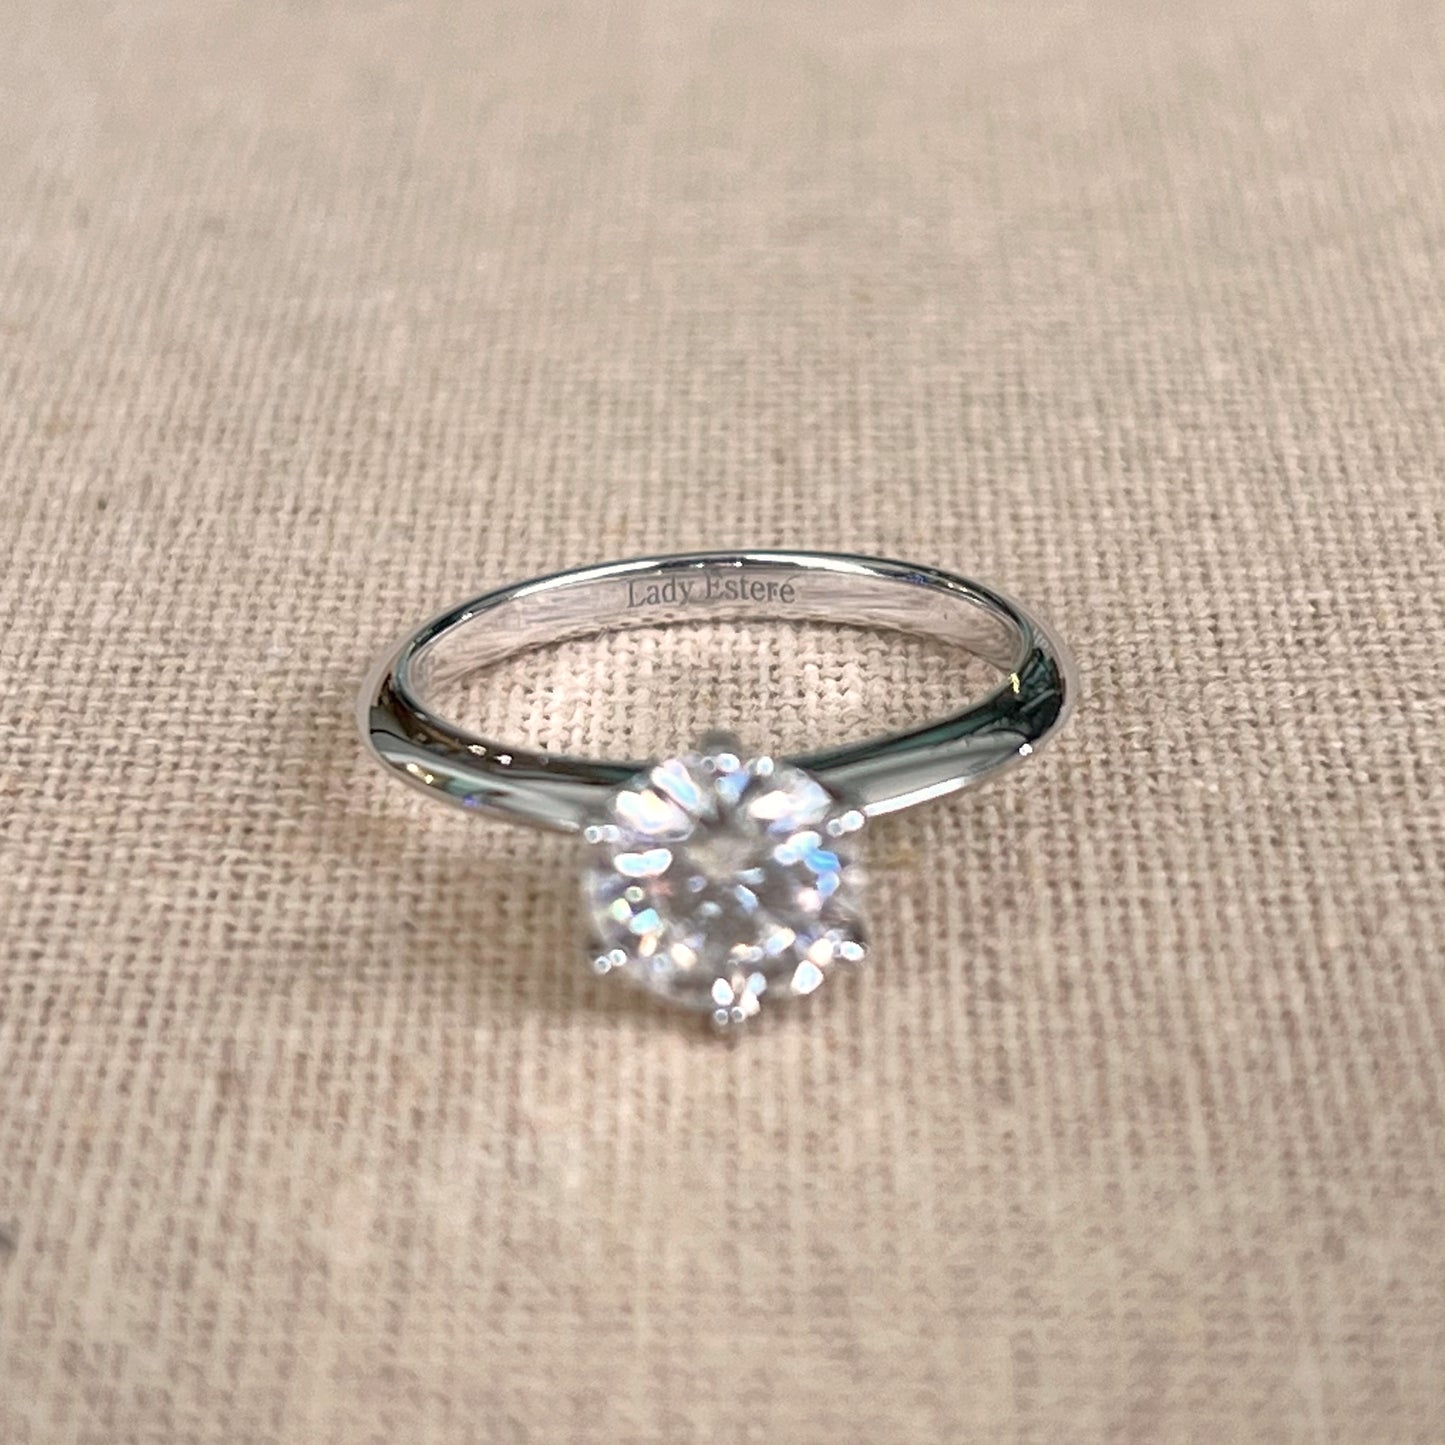 1.2ct Tiffany Setting Solitaire in White Gold